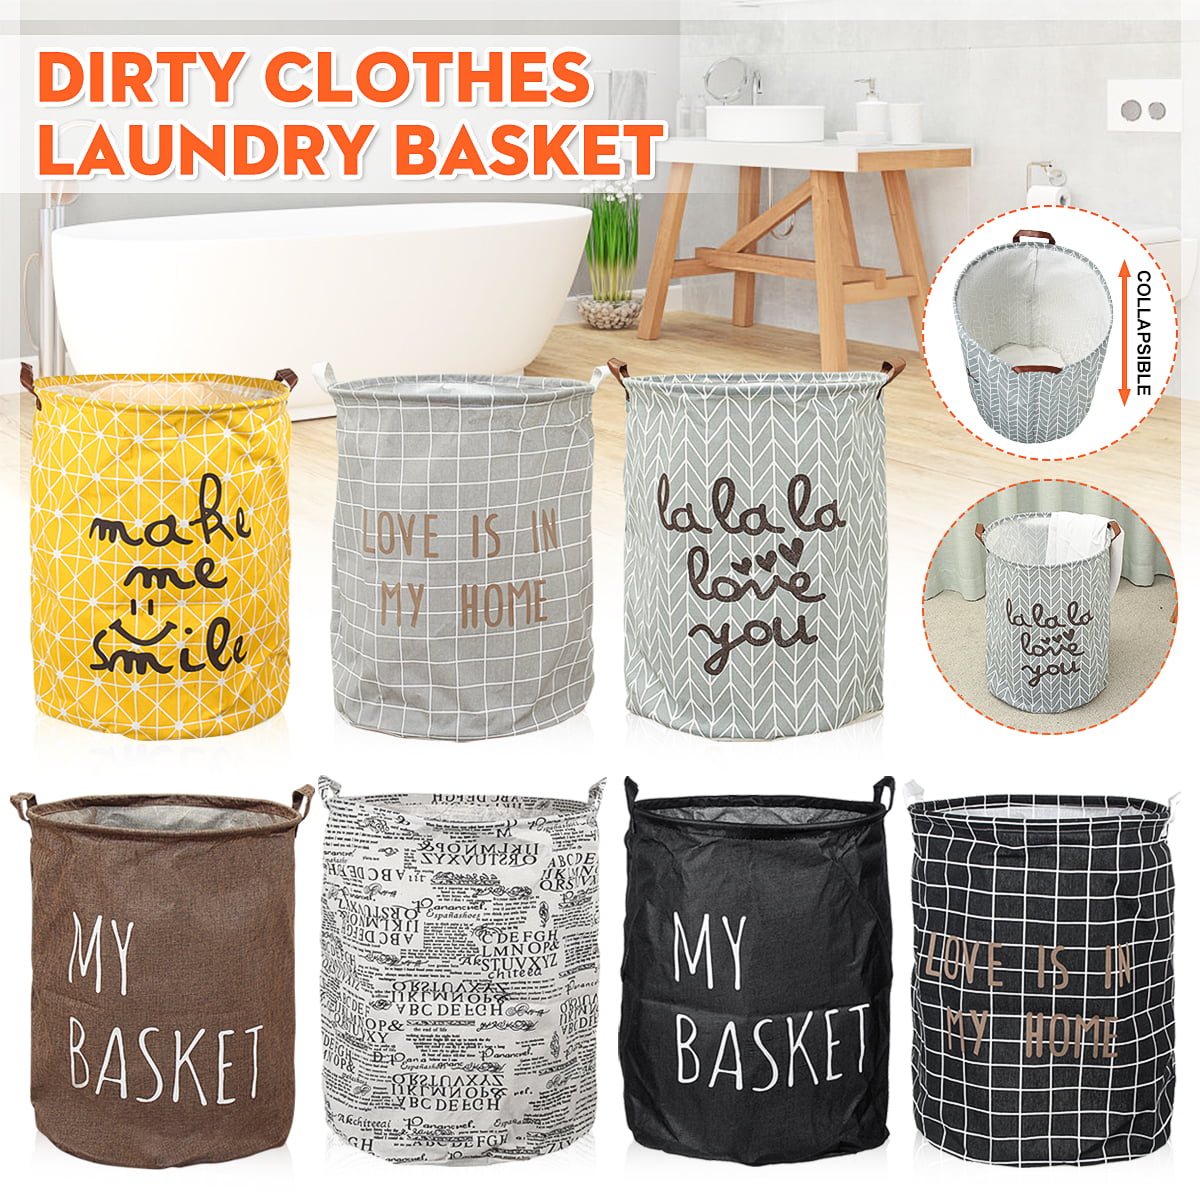 Details about  / Foldable Laundry Hamper Cotton Fabric Basket Bag Dirty Washing Clothes Storage